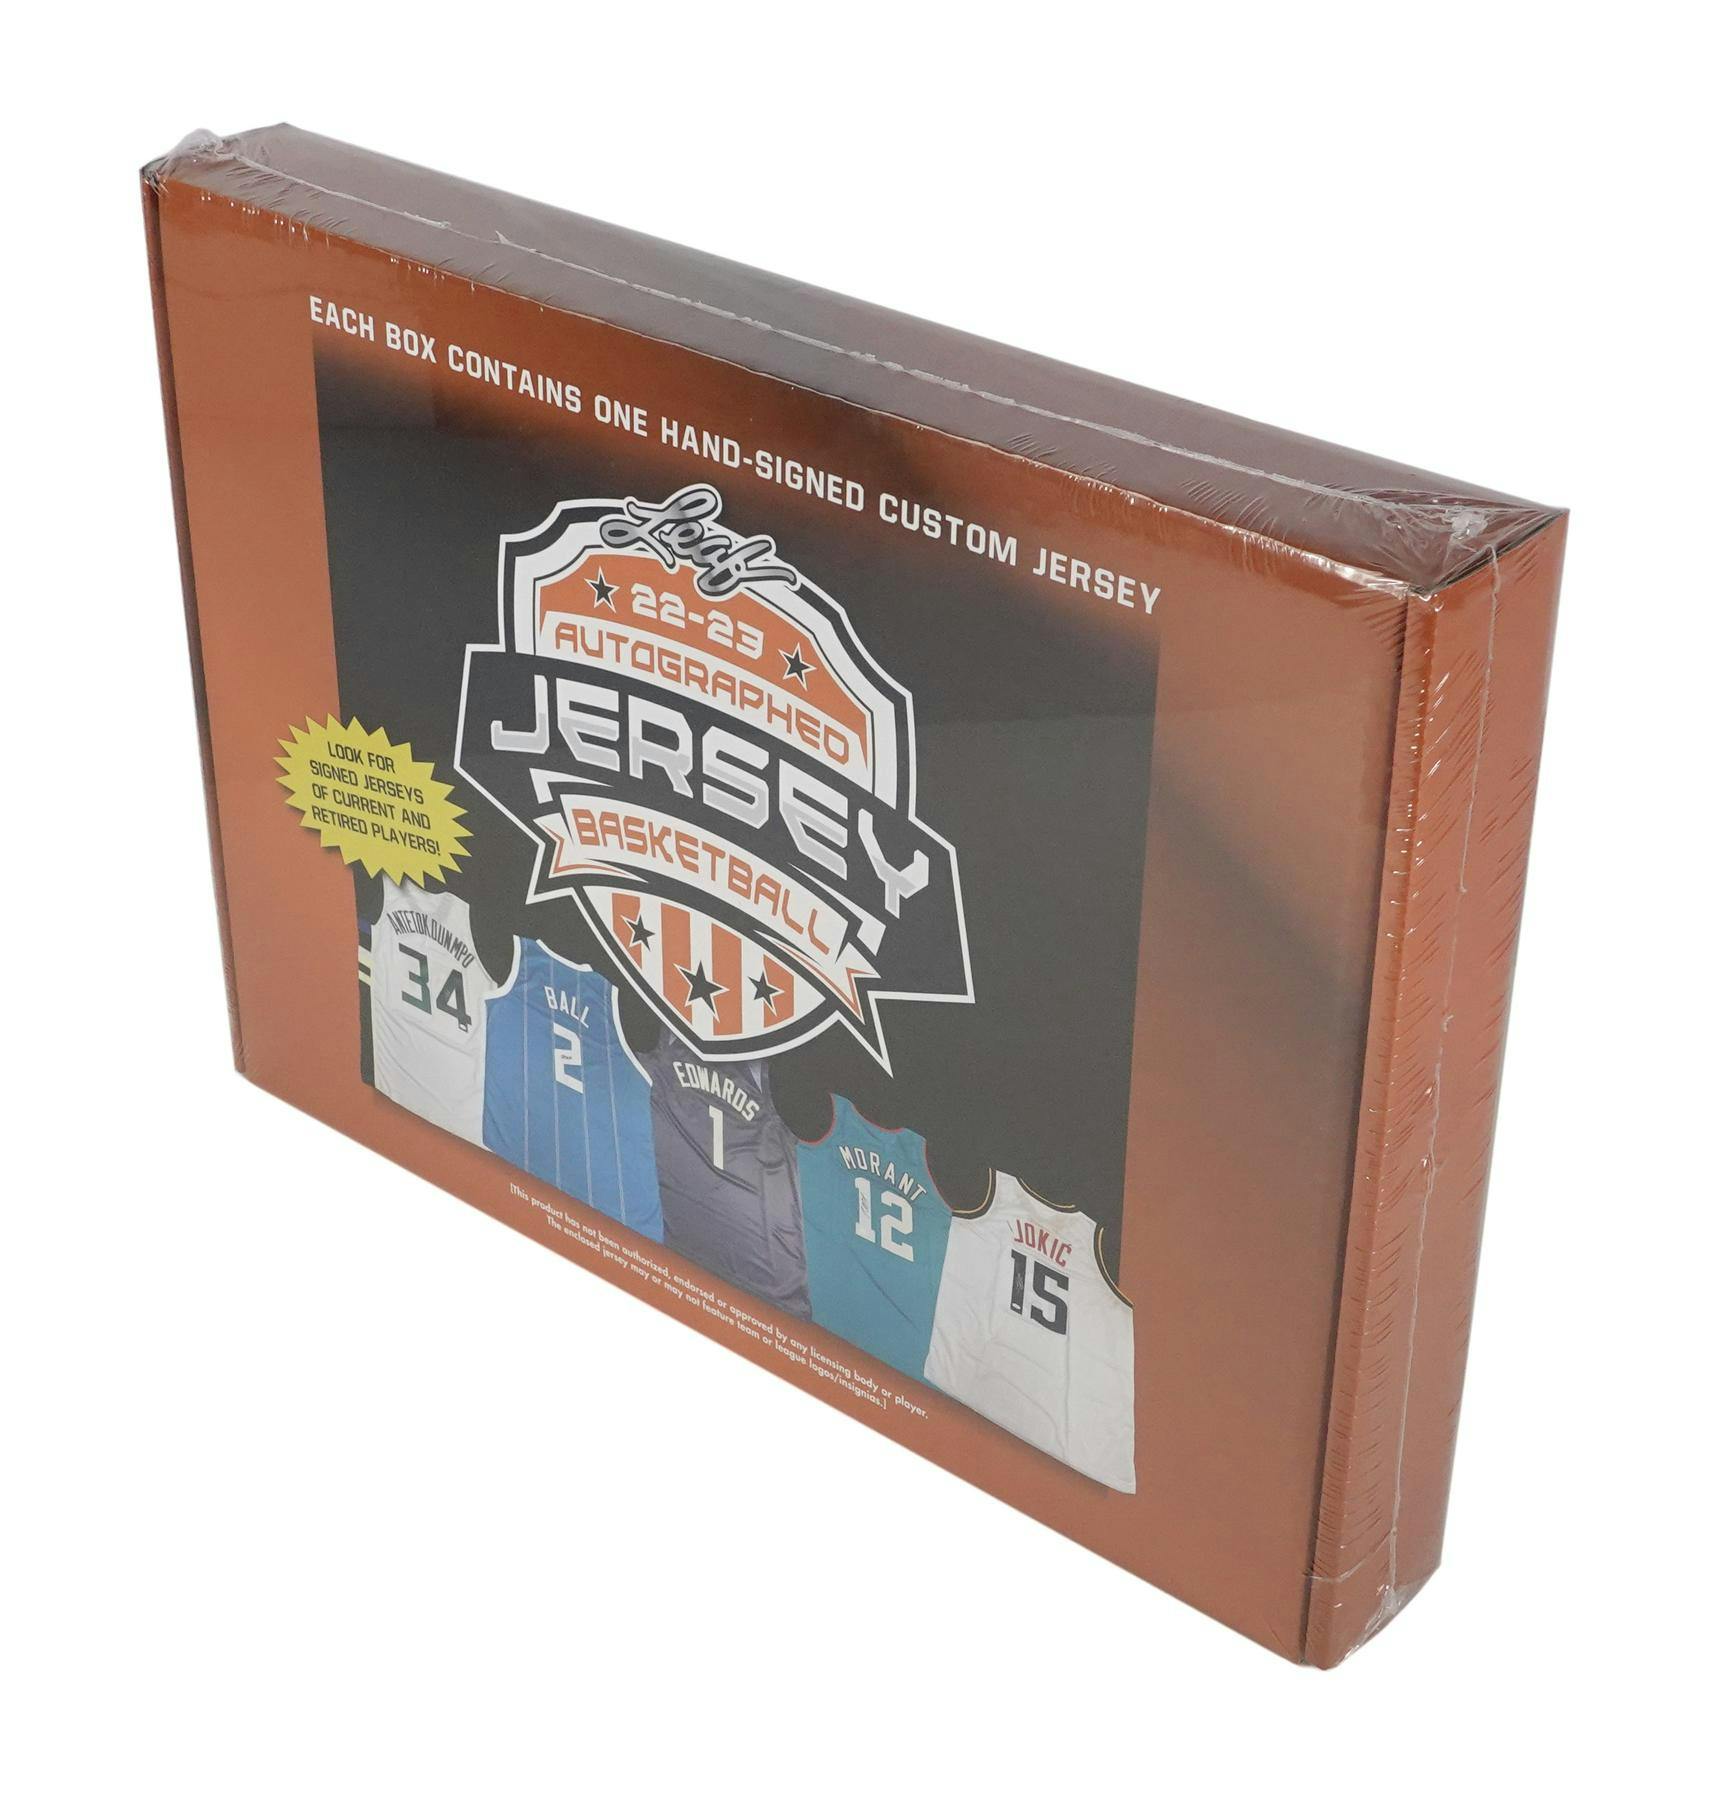 2022 Leaf Autographed Football Jersey Edition Box